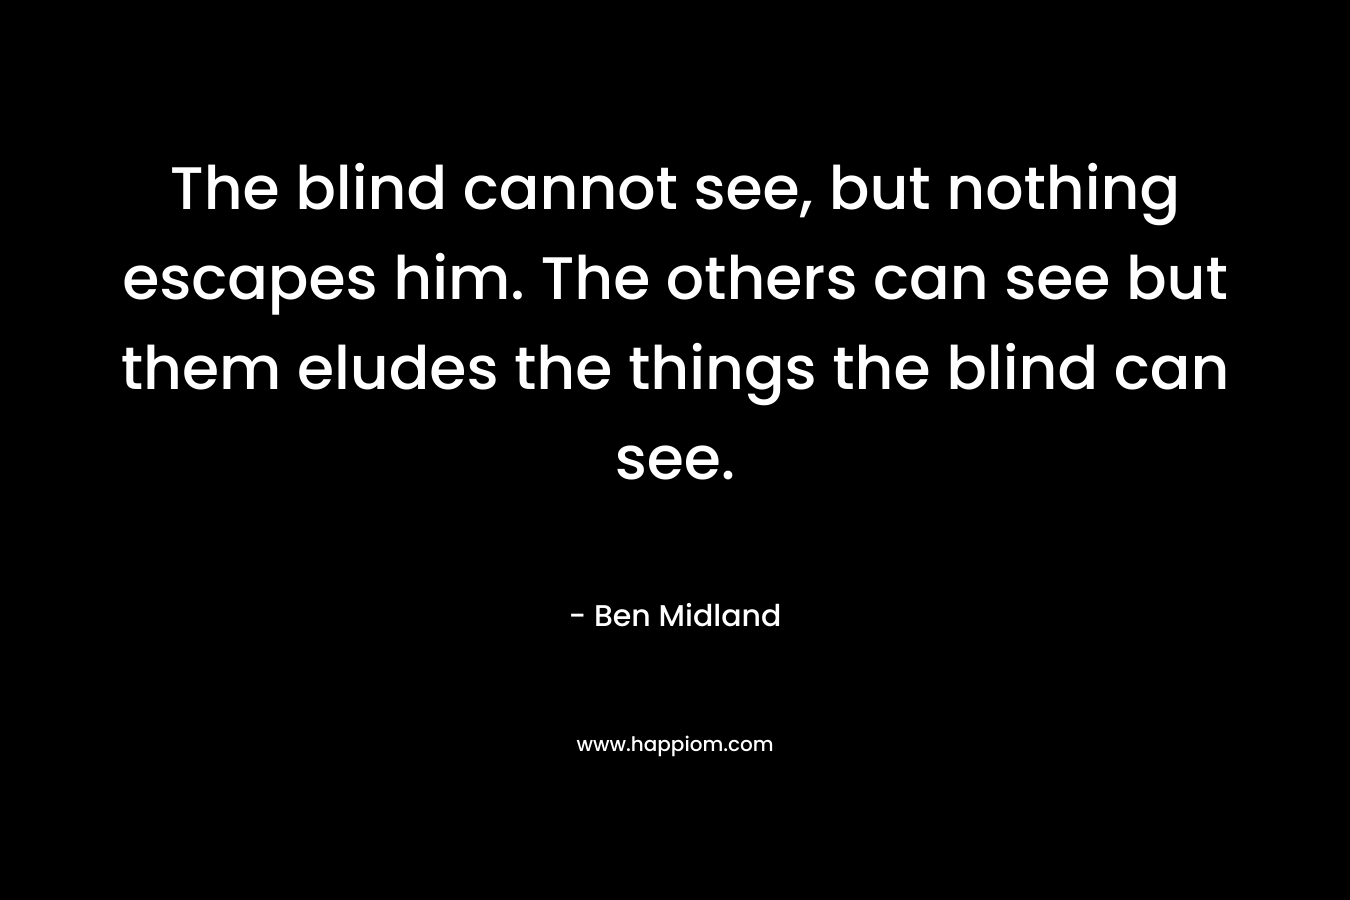 The blind cannot see, but nothing escapes him. The others can see but them eludes the things the blind can see. – Ben Midland